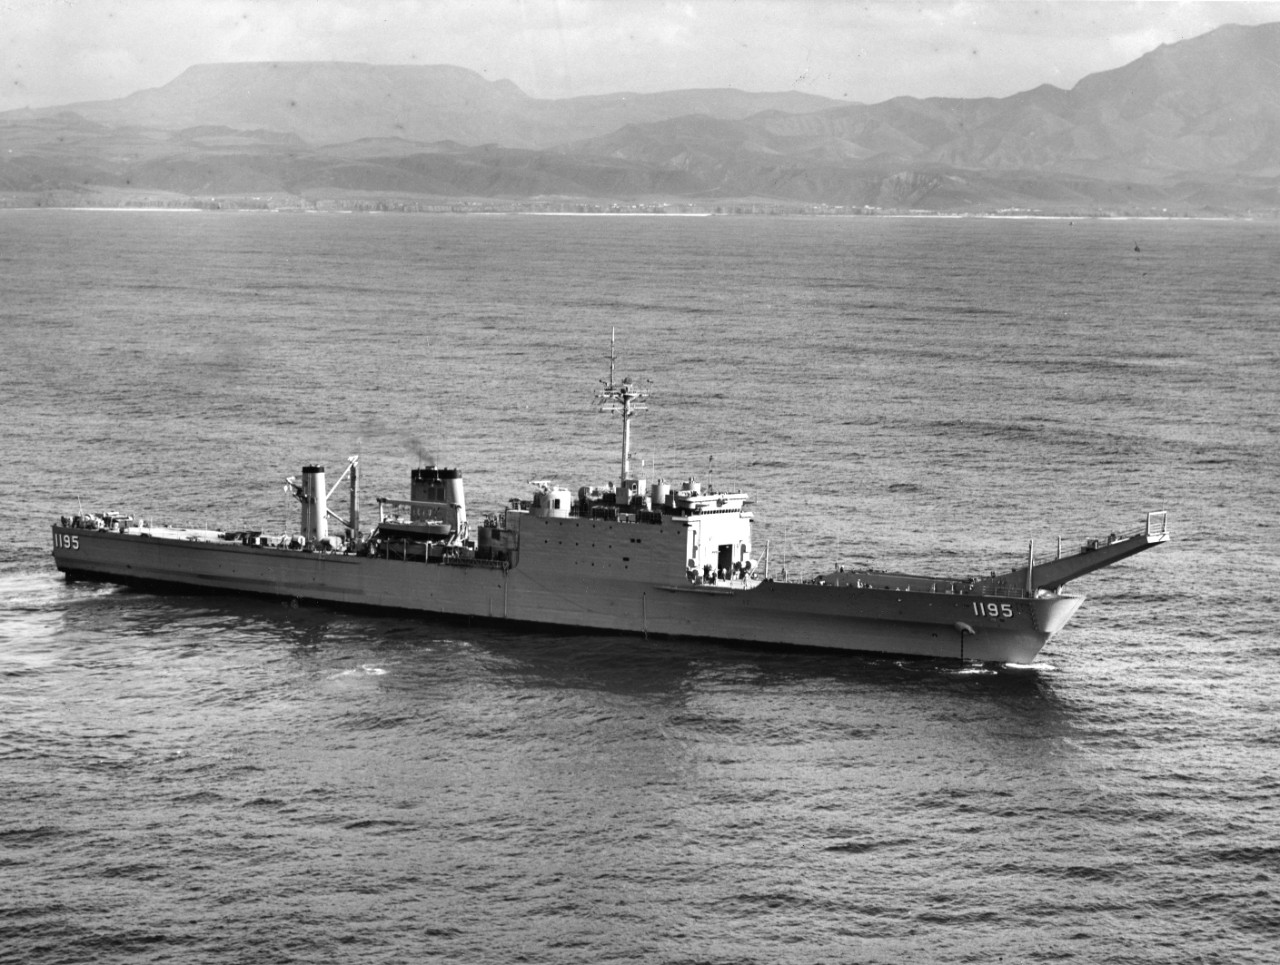 USS Barbour County (LST-1195) off the coast of southern California